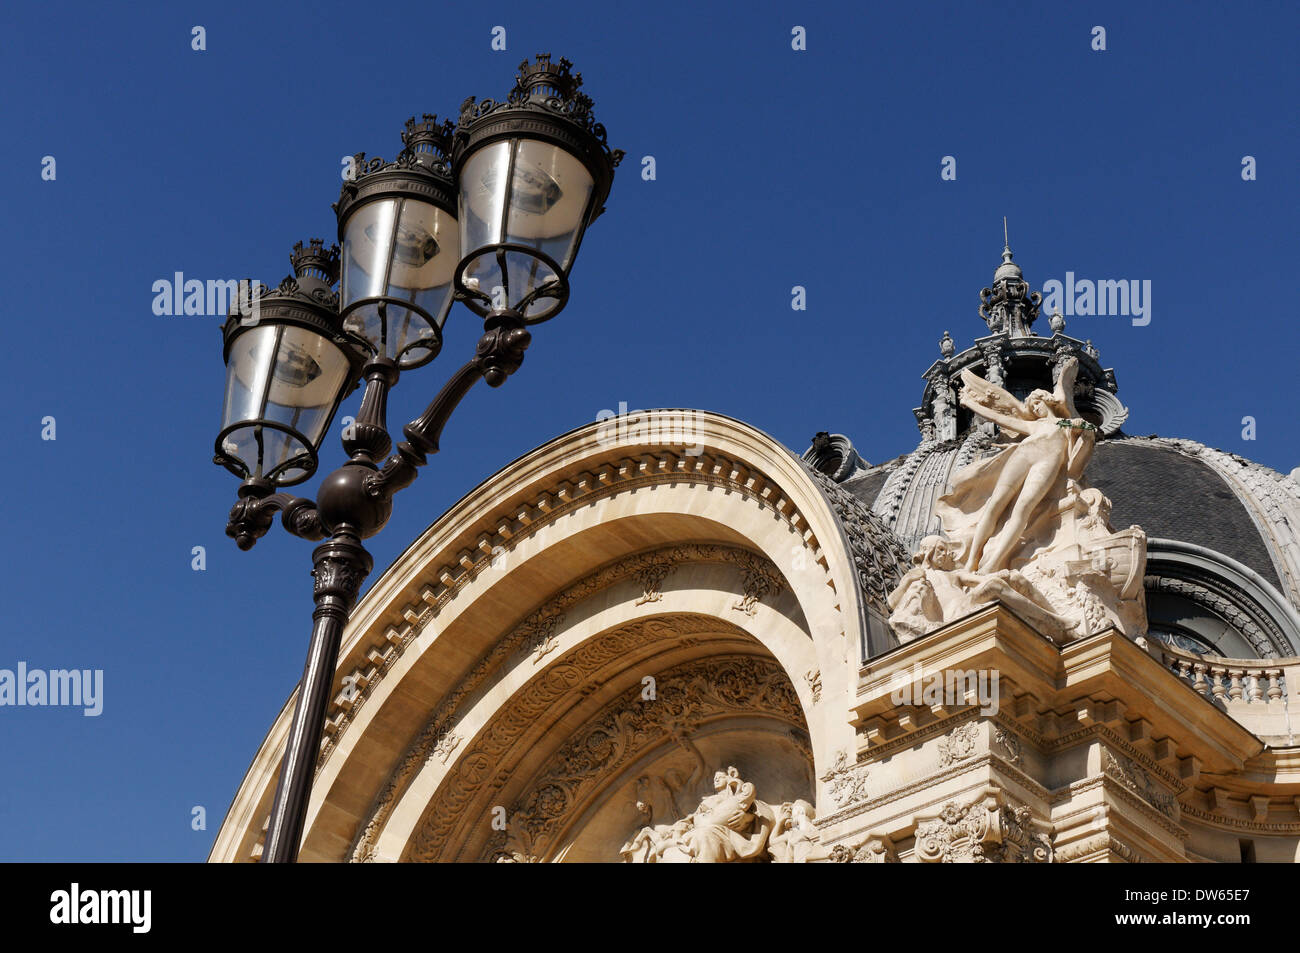 Details of the main door of the Petit Palais in Paris, France Stock Photo